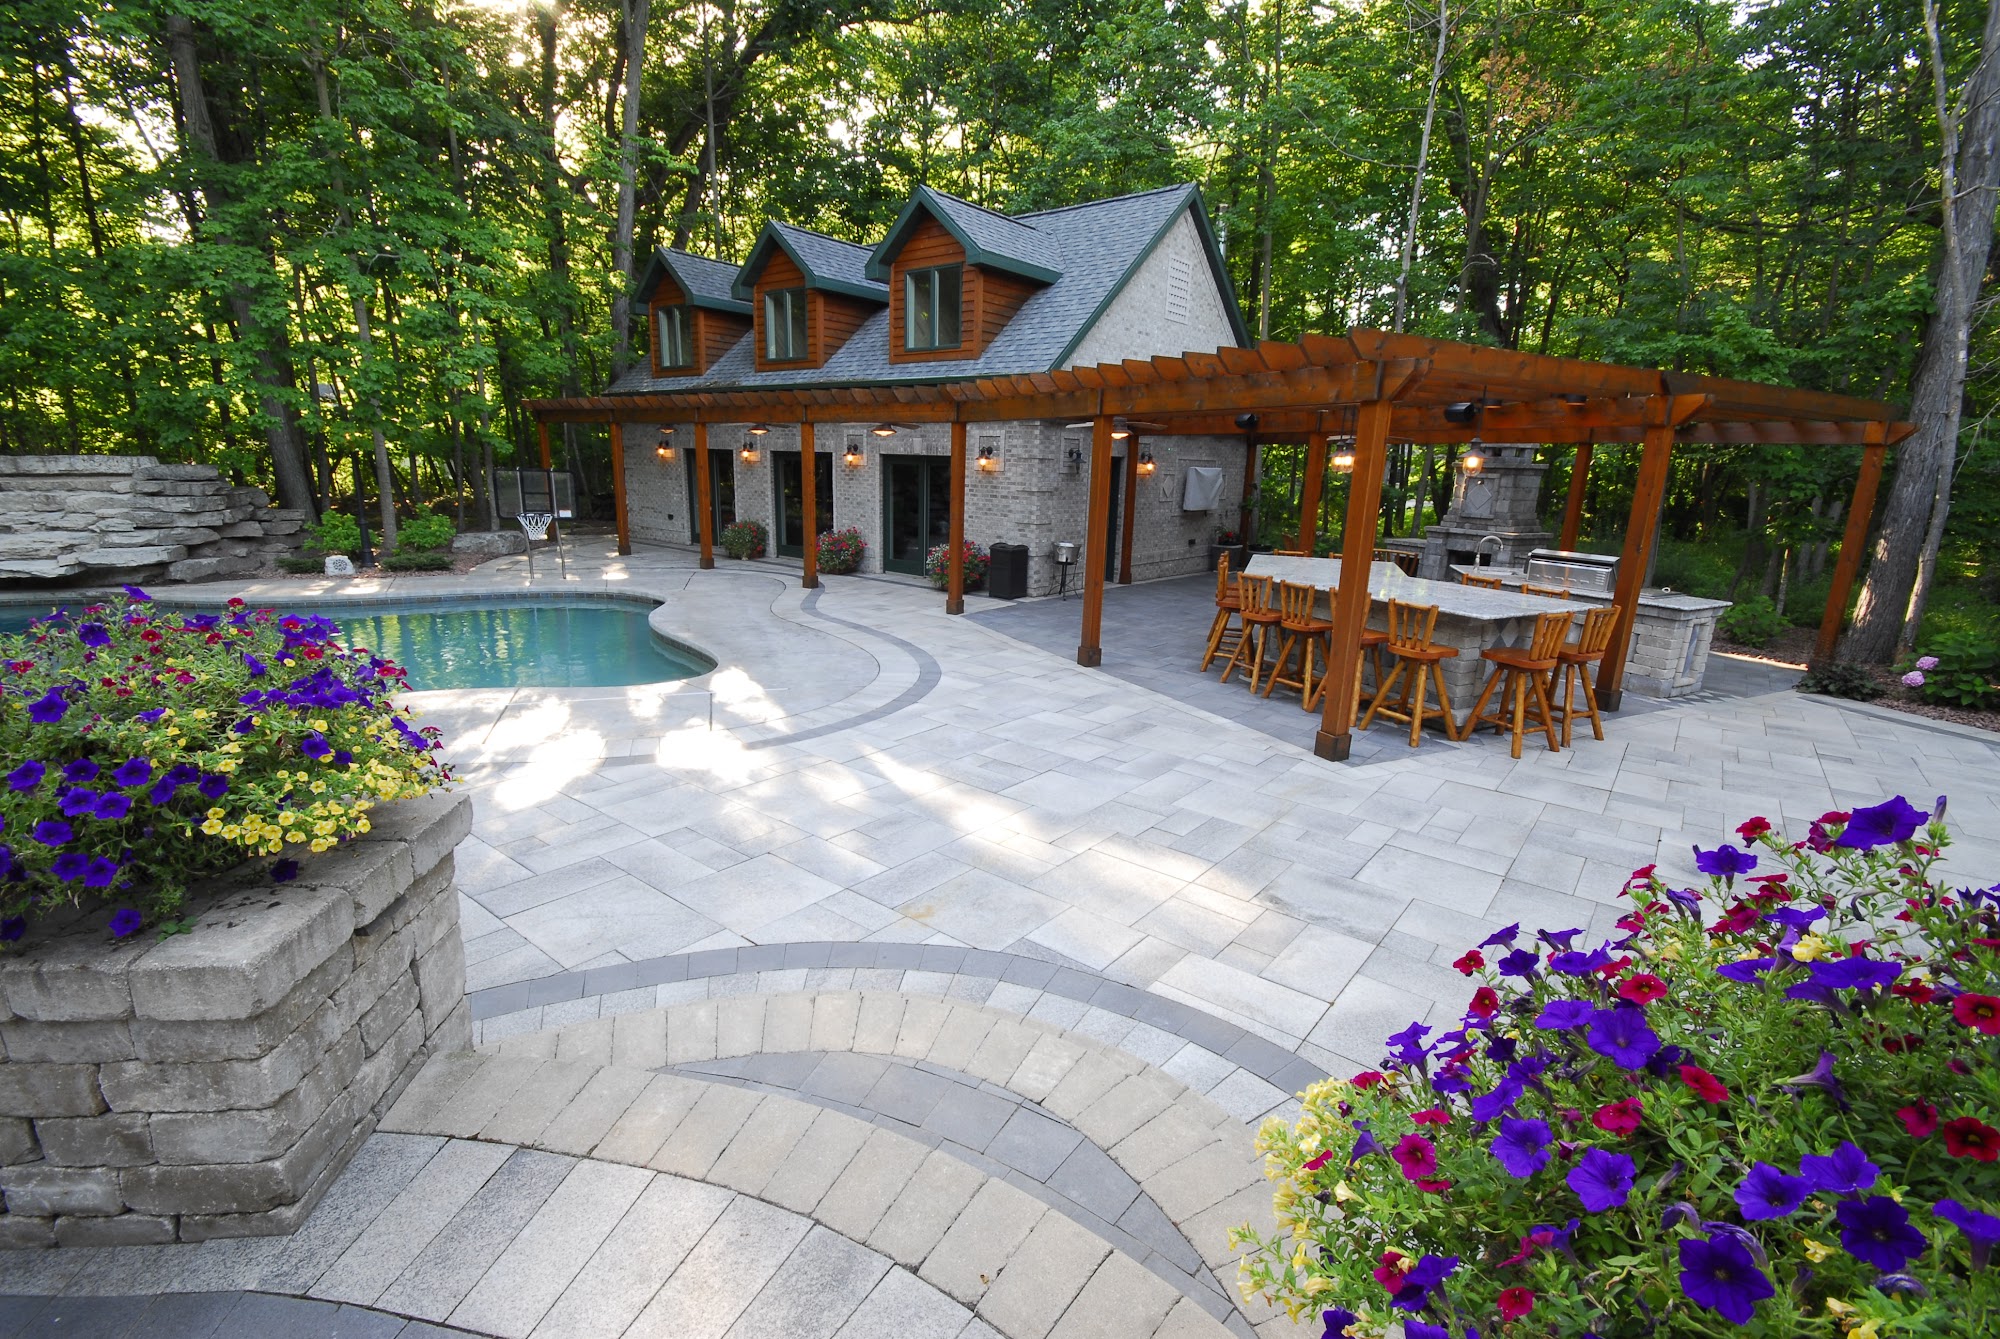 Outdoor Living and Landscapes, LLC